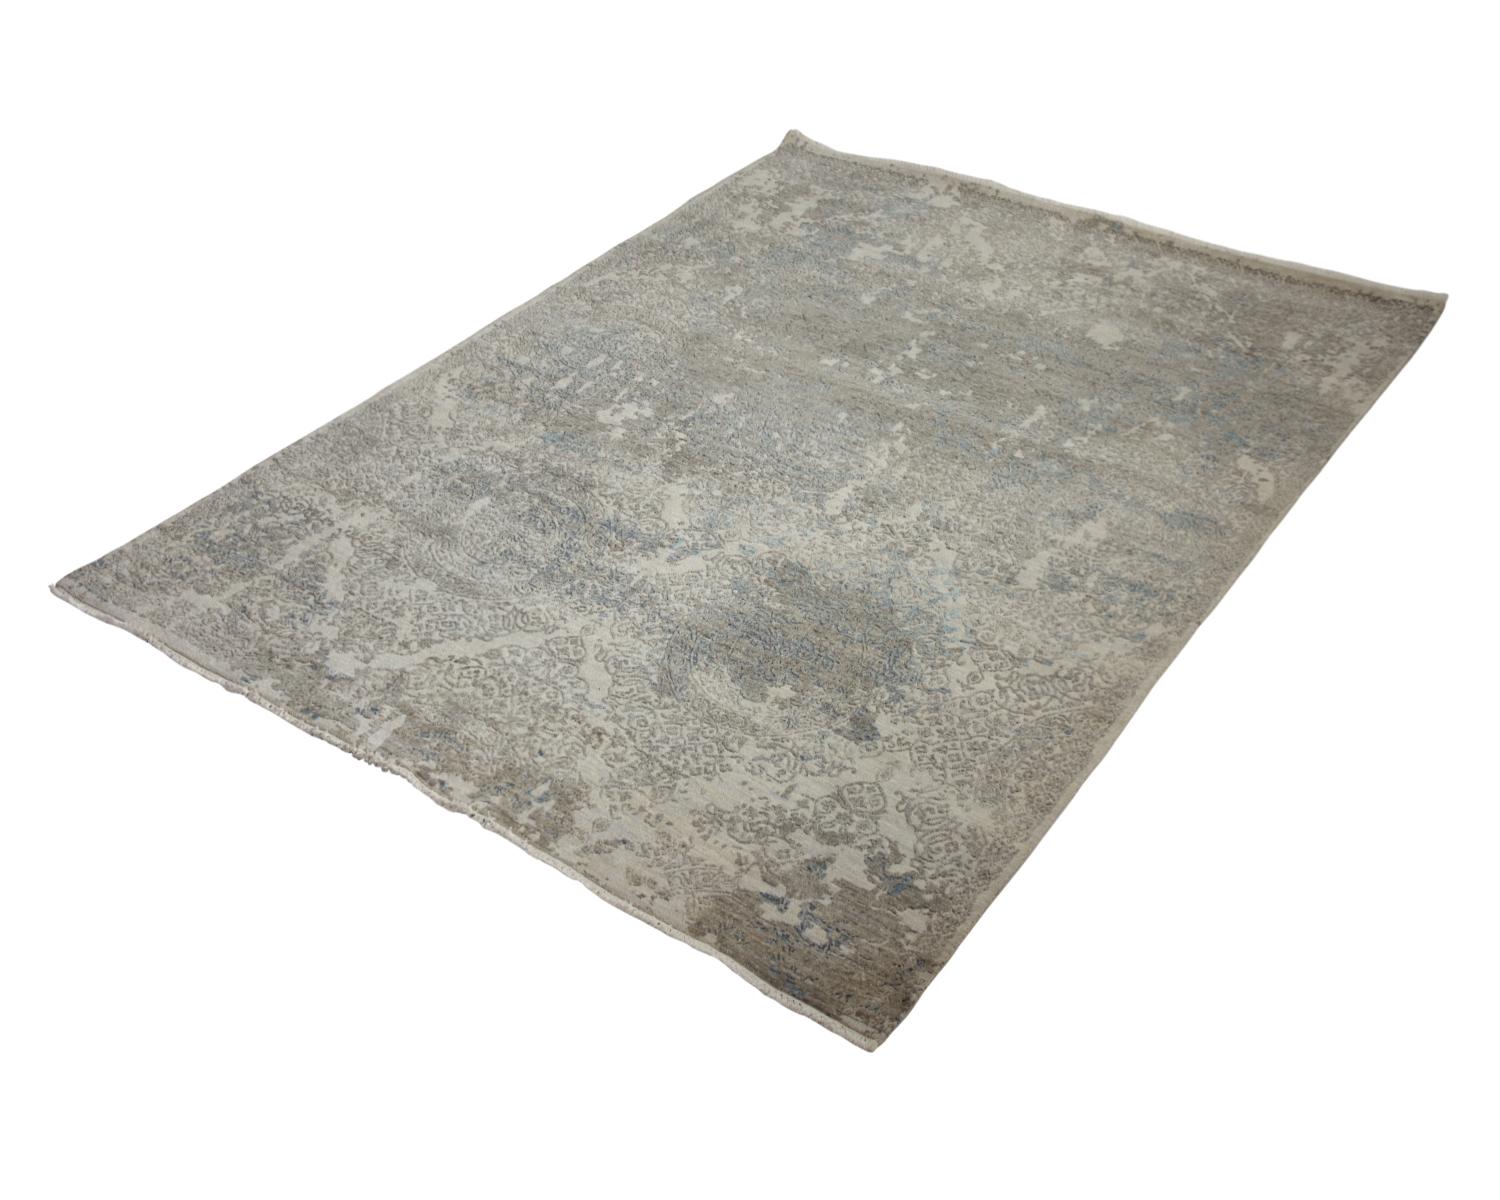 One-of-a-Kind Modern Wool Cotton Blend Hand-Knotted Area Rug, Taupe, 8'1 x 9'10 3